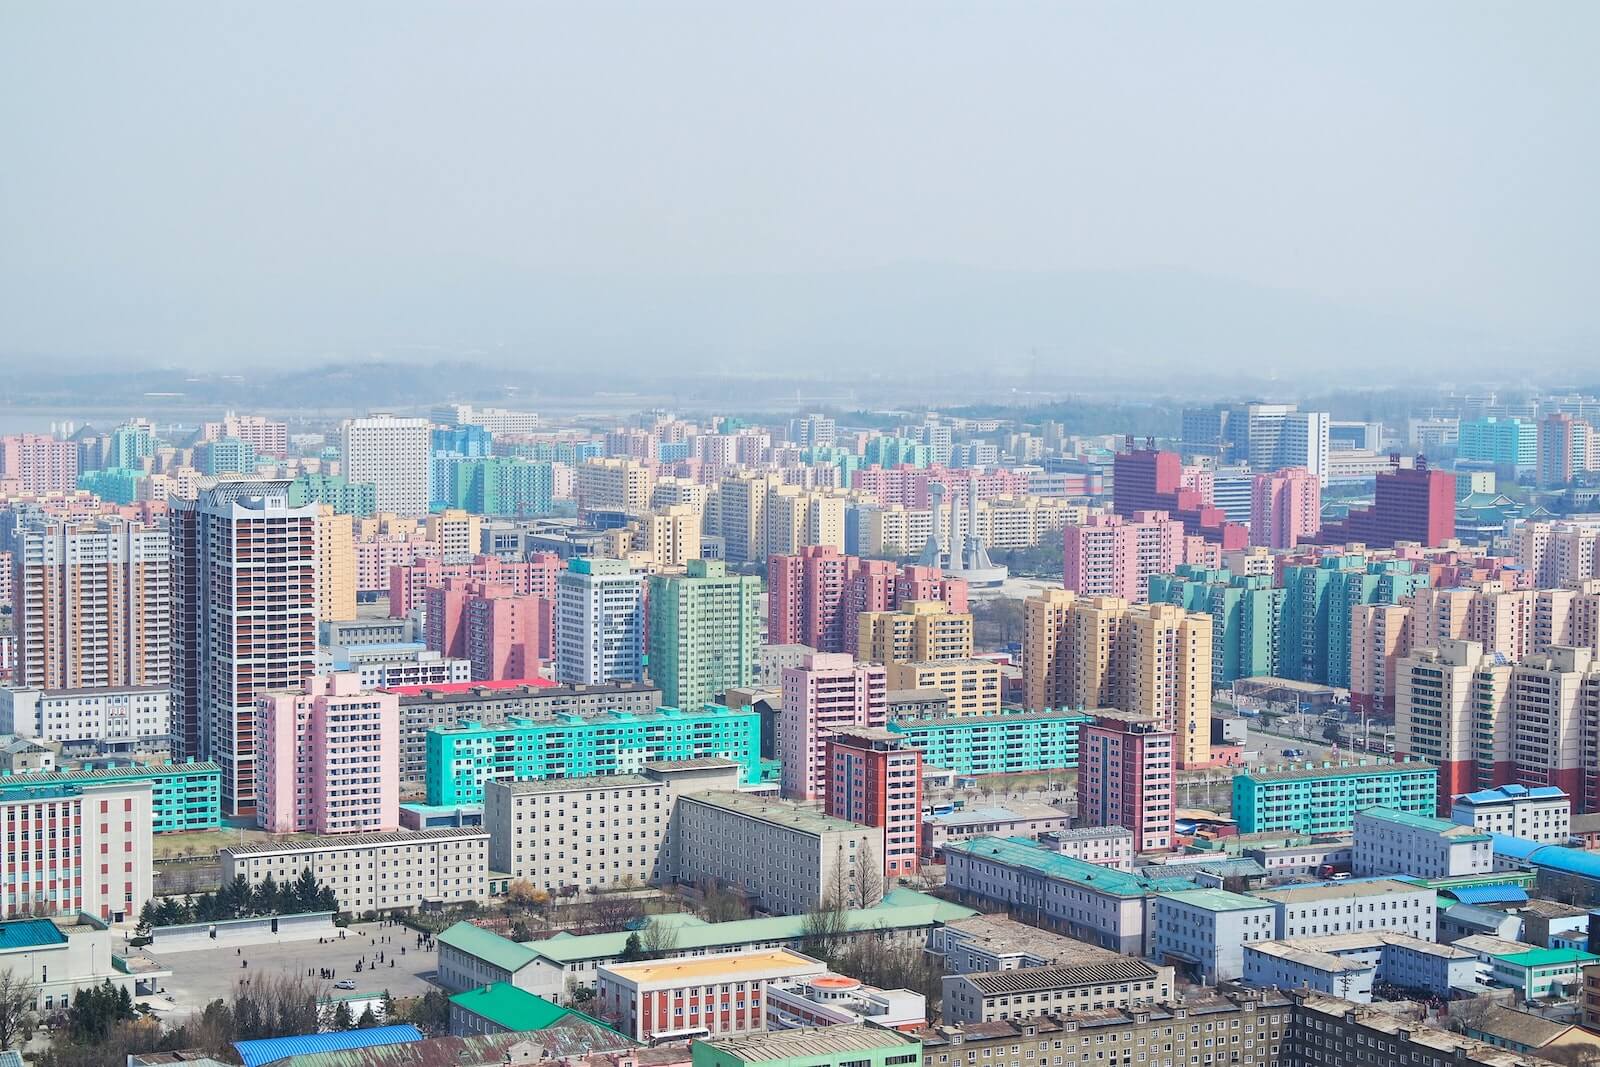 The flats of Pyongyang, as photographed from the Juche Tower in North Korea